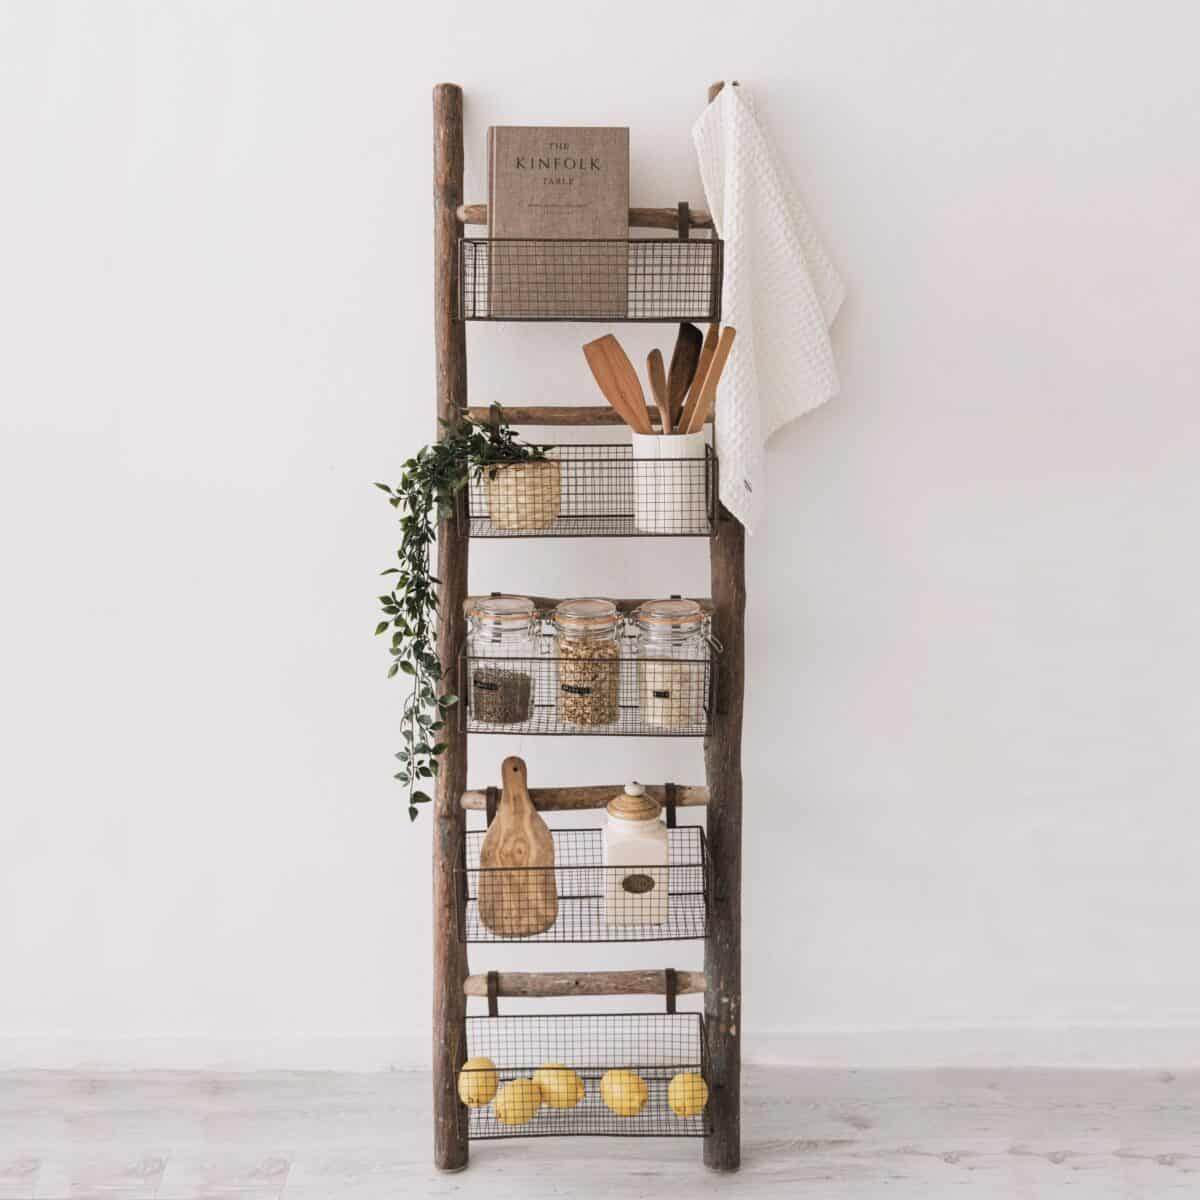 Storage ladder with baskets filled with kitchen utensils, fruit, and greenery.